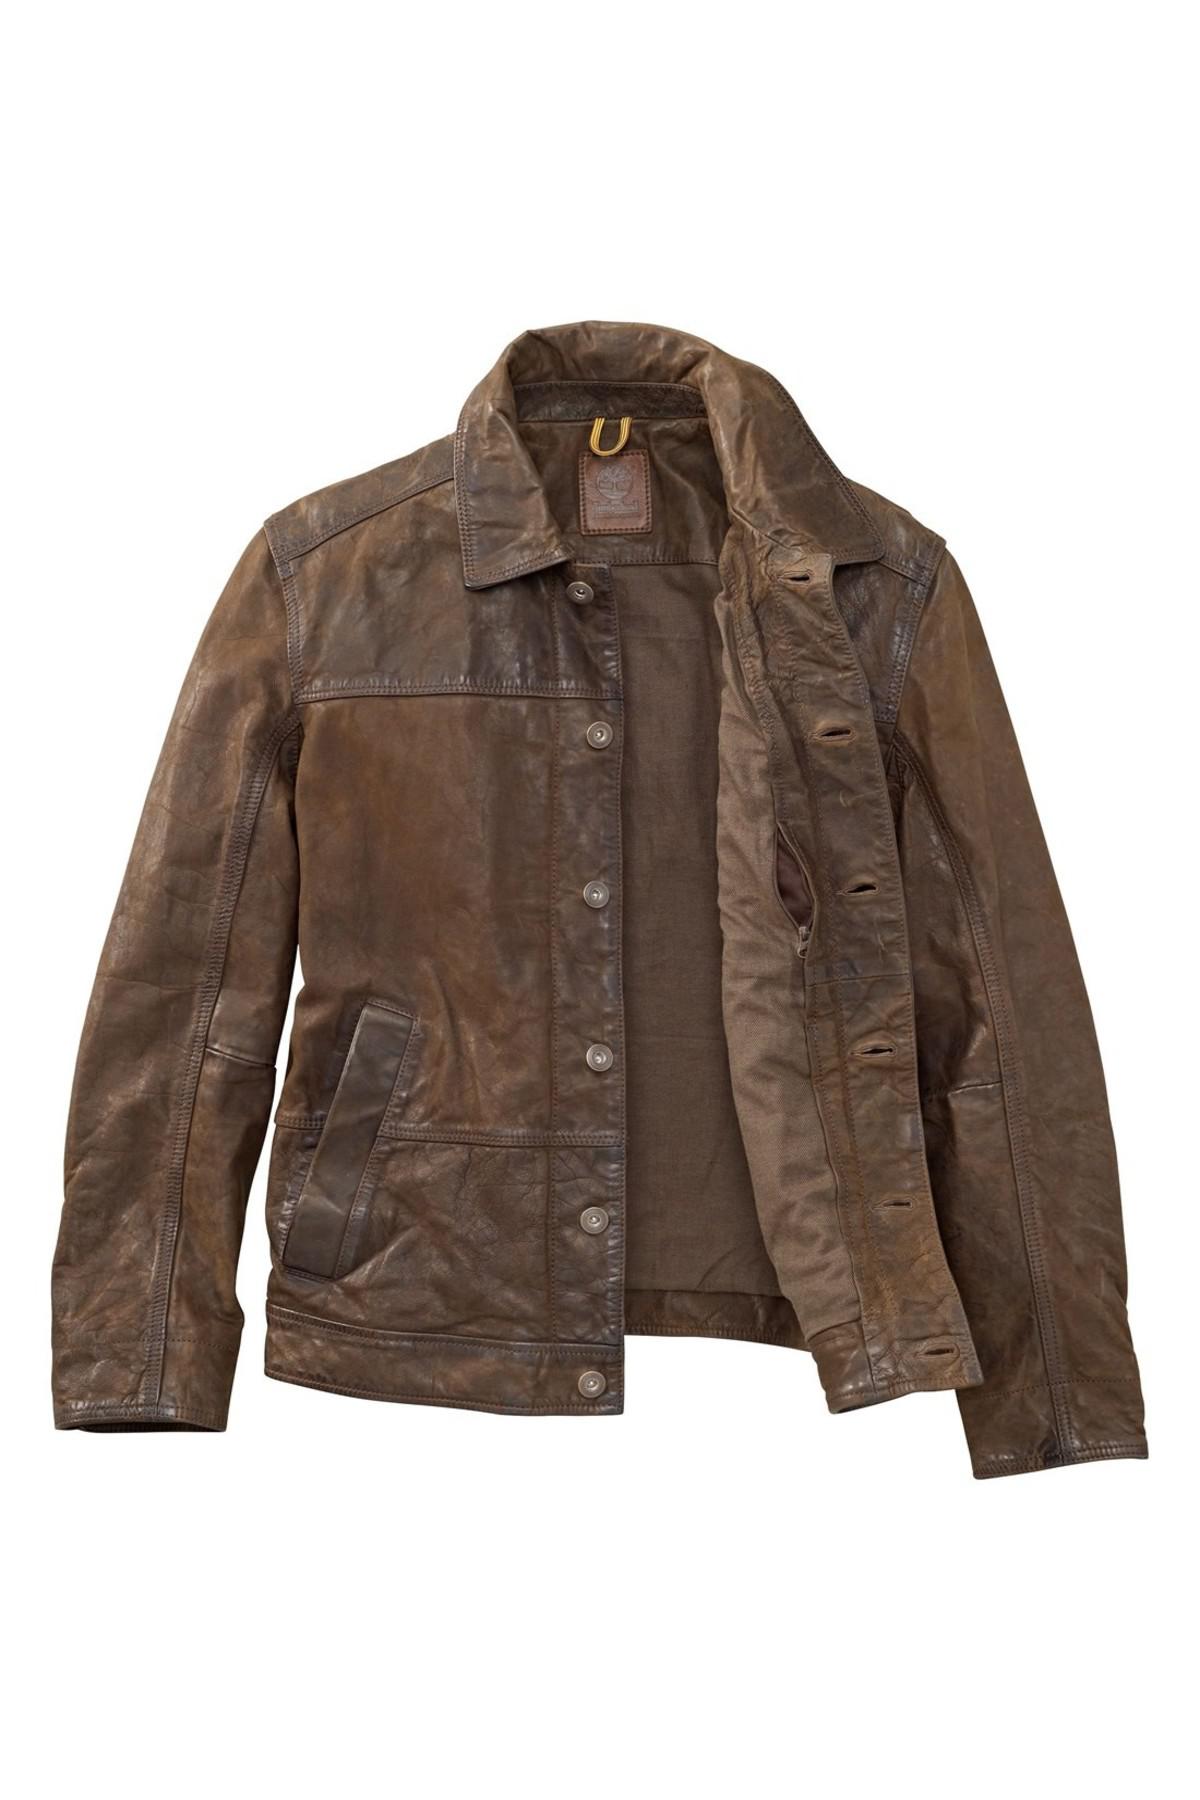 Timberland 'tenon' Leather Jacket in Cocoa (Brown) for Men | Lyst